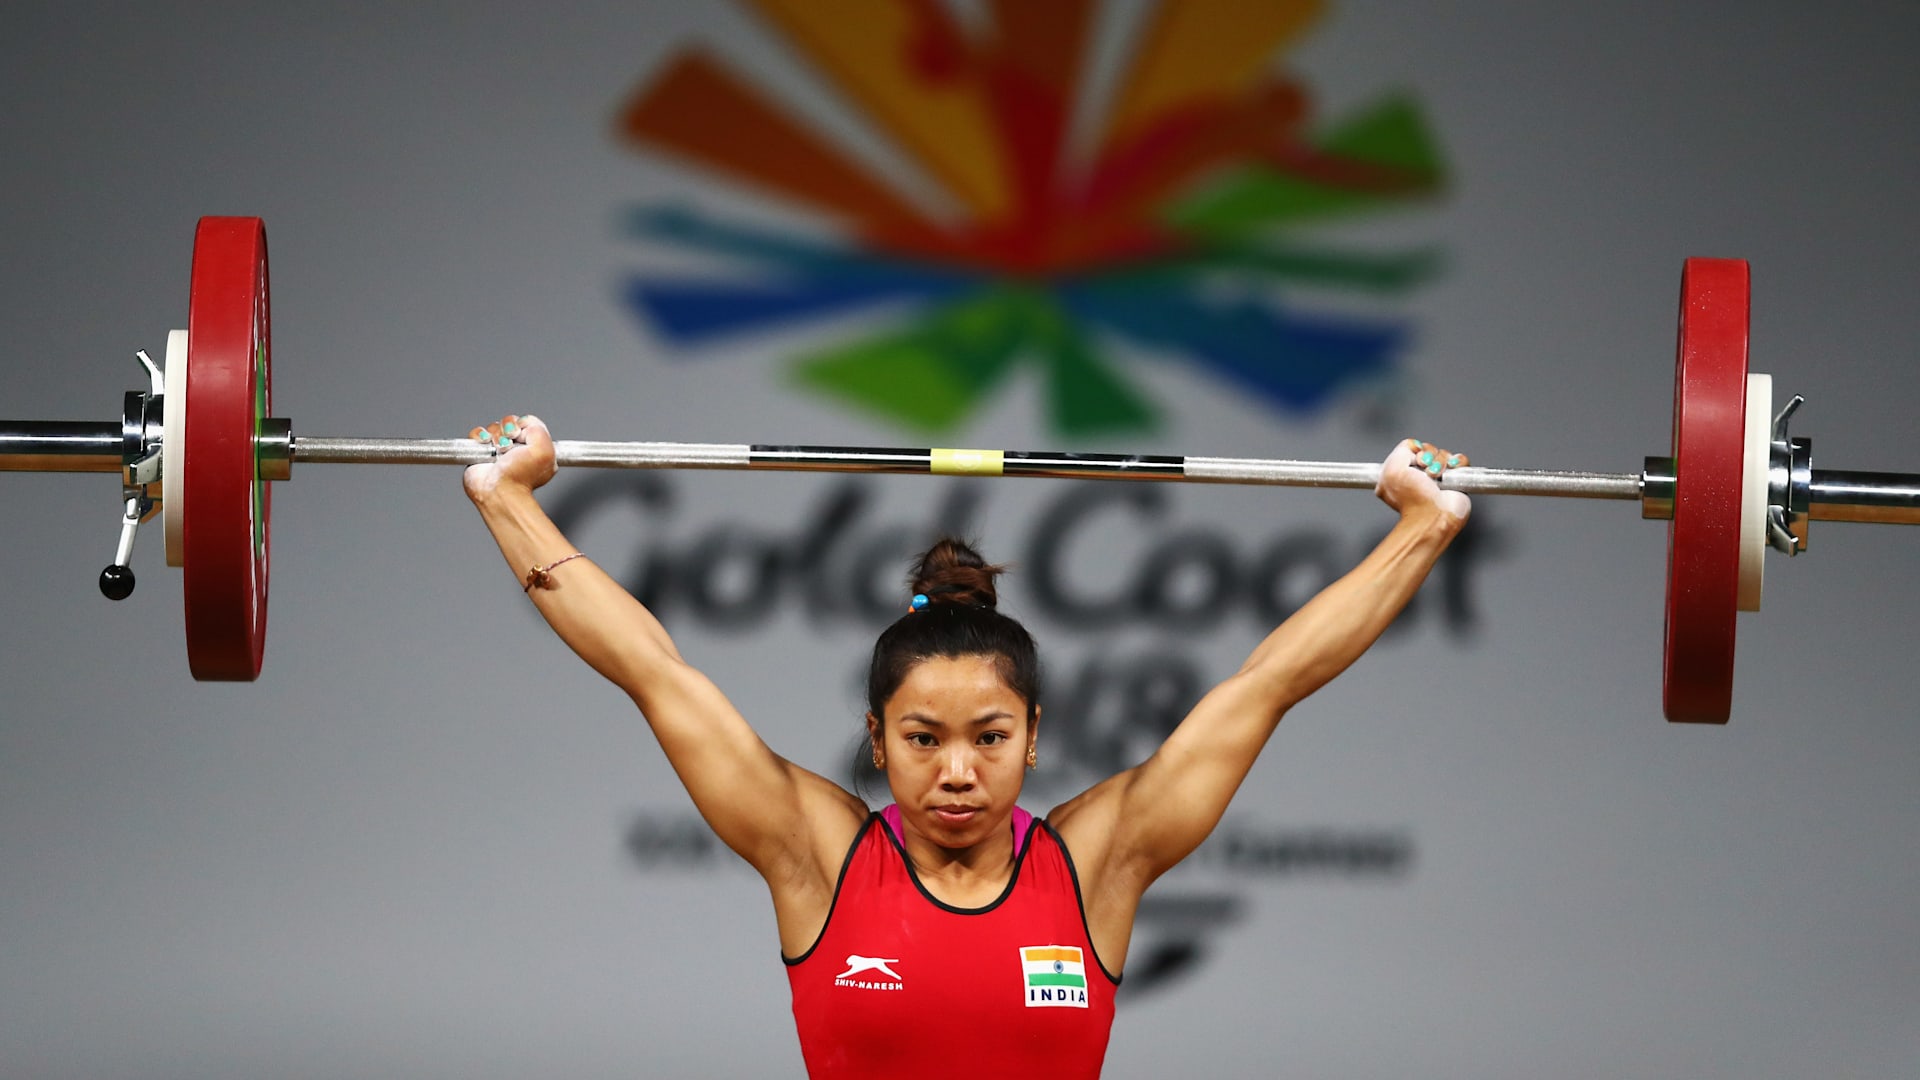 Mirabai Chanu&#39;s Olympic medal chances at Tokyo 2020: Know the Indian weightlifter&#39;s rivals